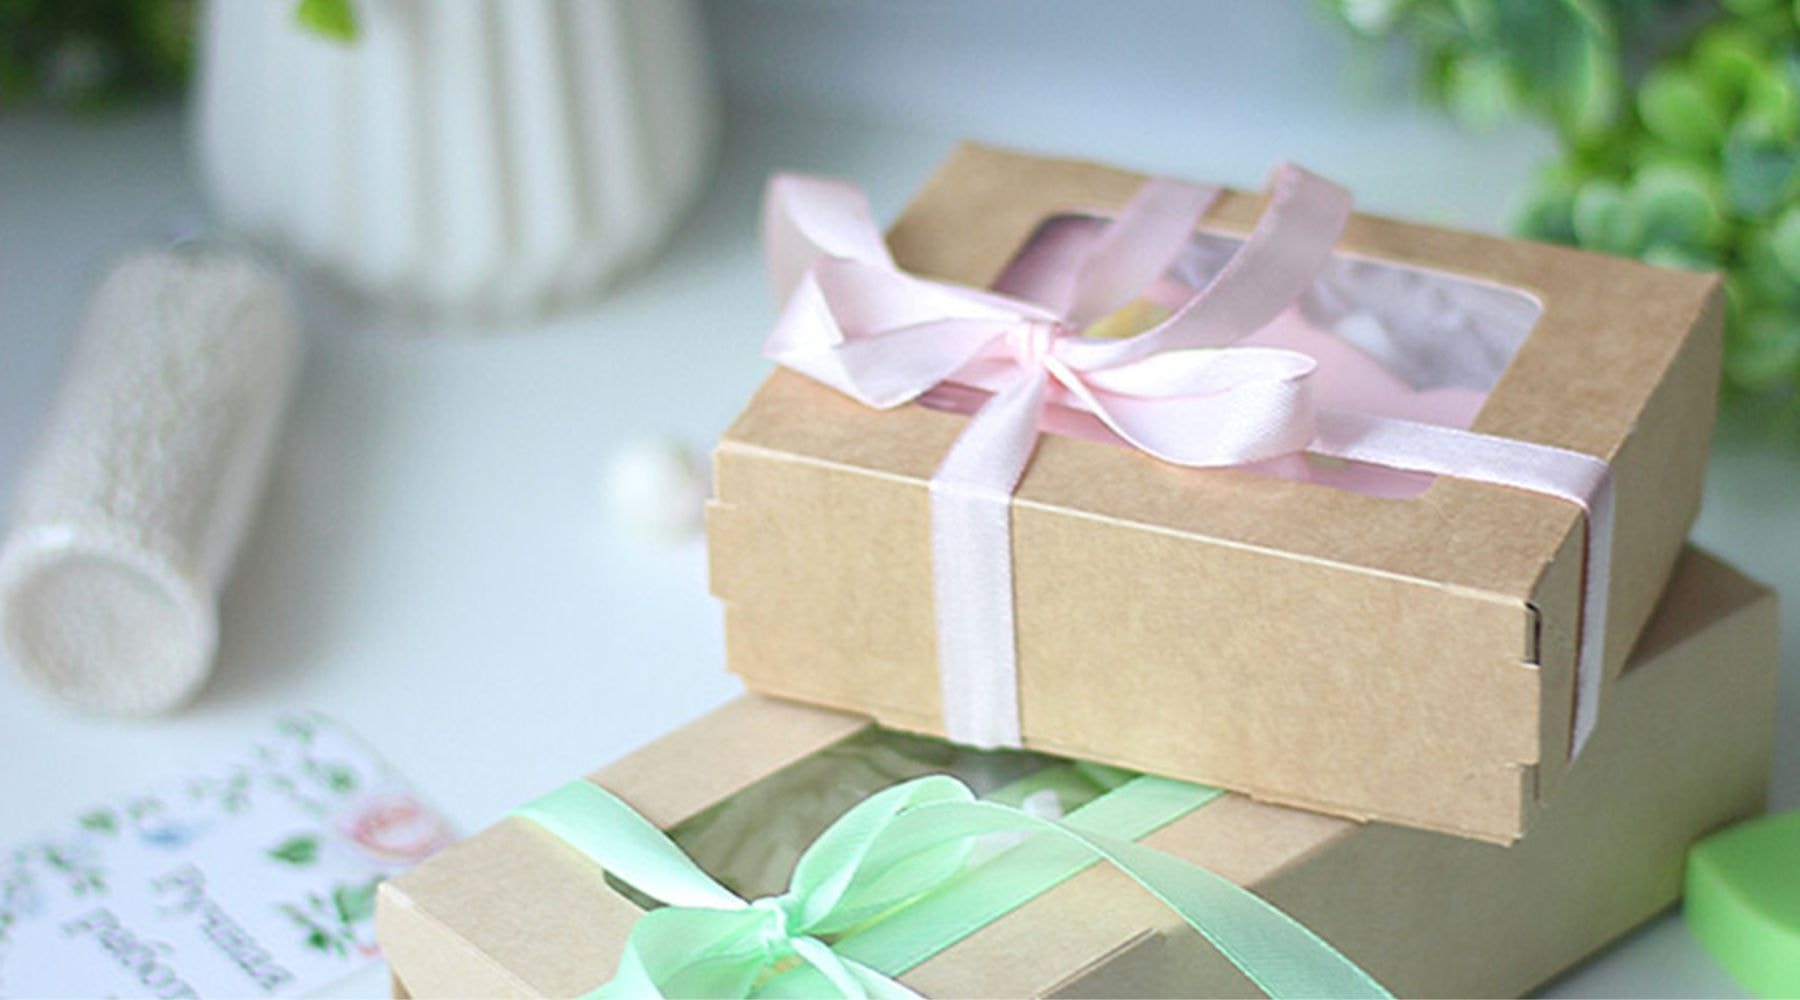 Handcrafted gift boxes tied with pastel pink and green ribbons, set on a rustic table surrounded by green plants